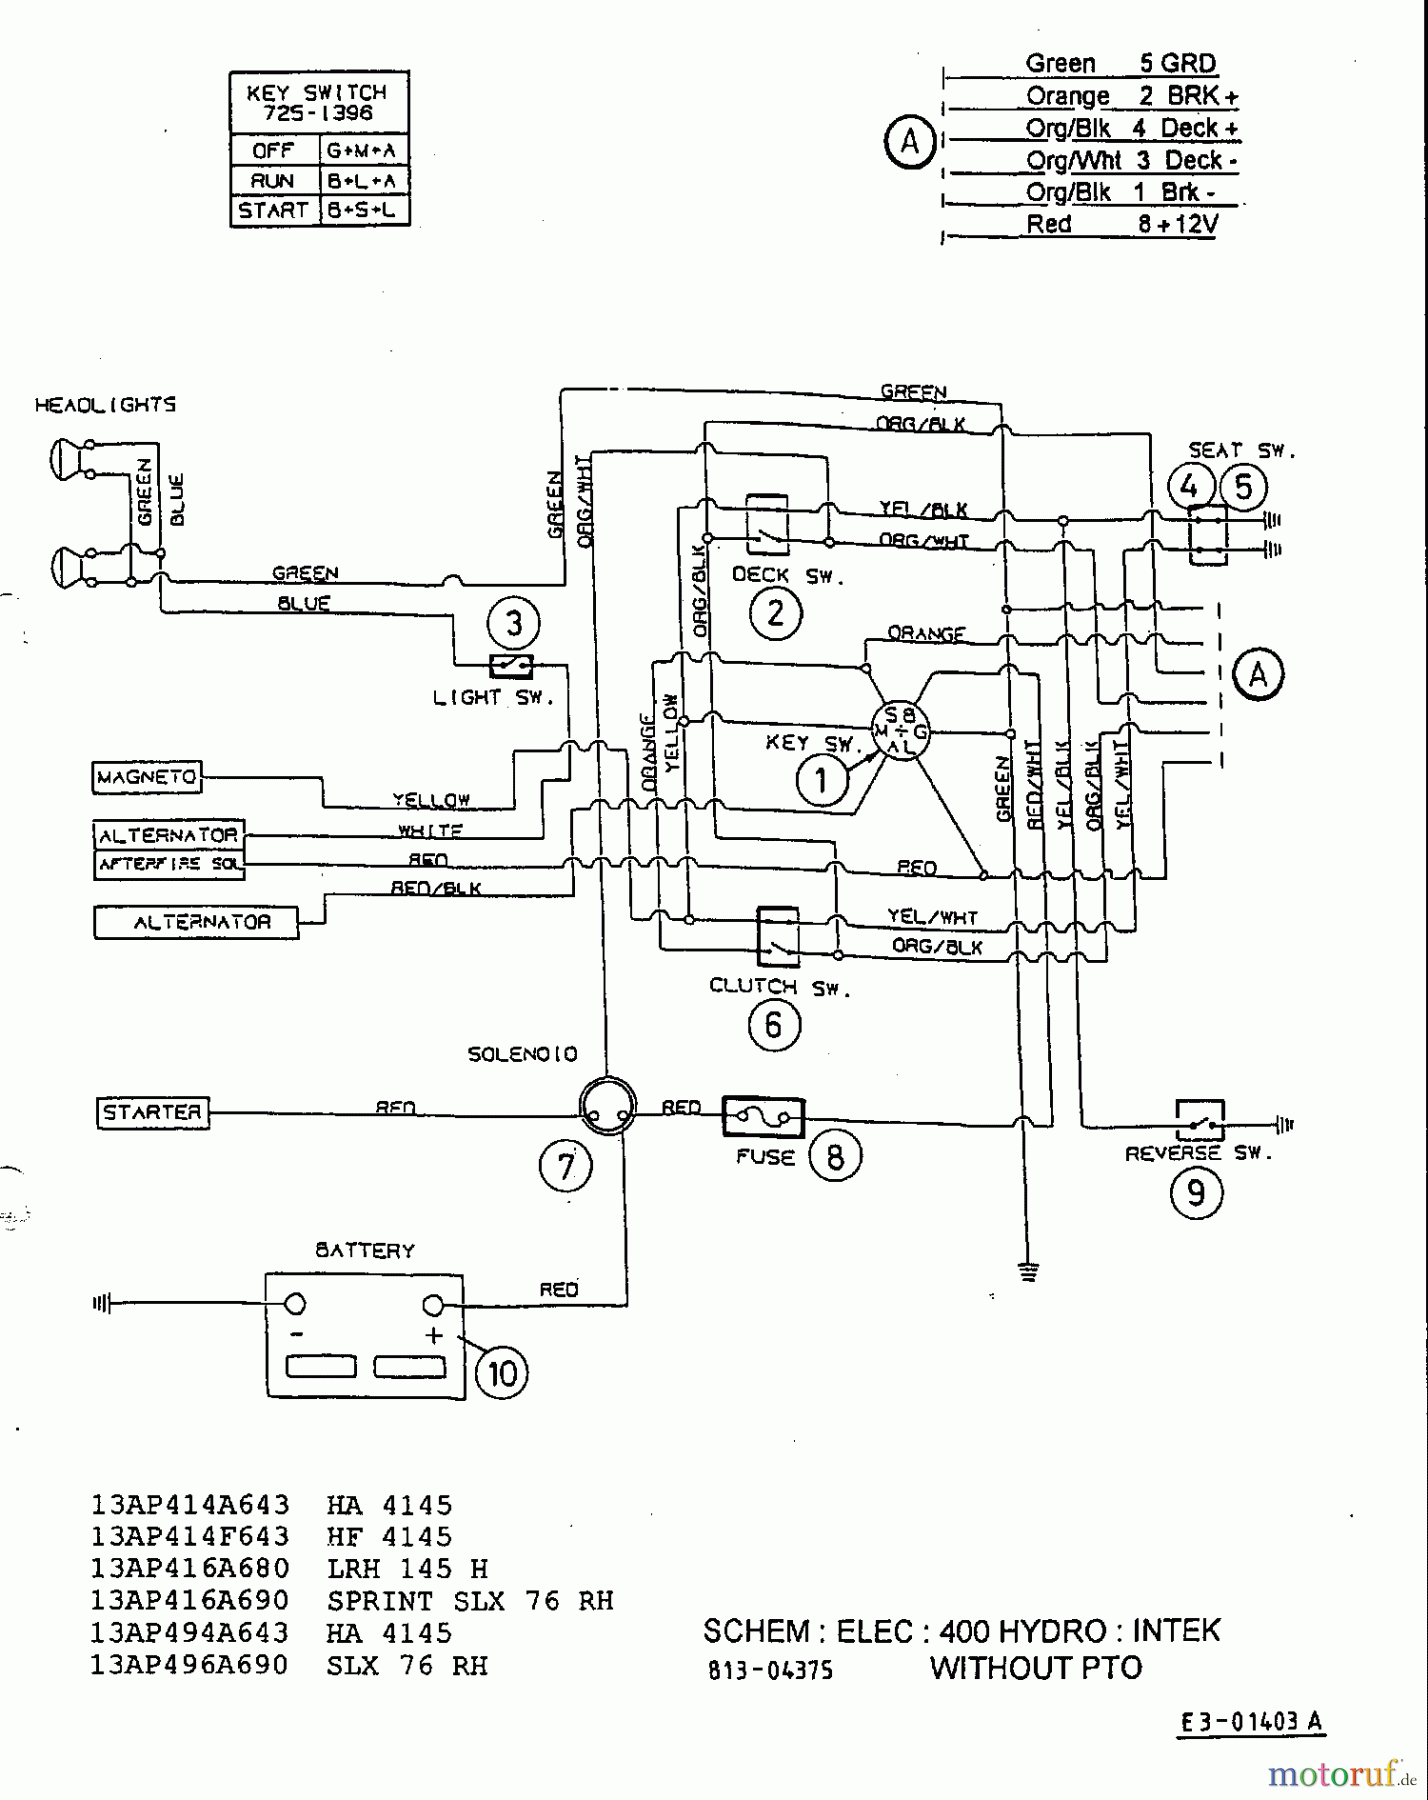  Gutbrod Lawn tractors SLX 76 RH 13AP496A690  (1999) Wiring diagram Intek without electric clutch